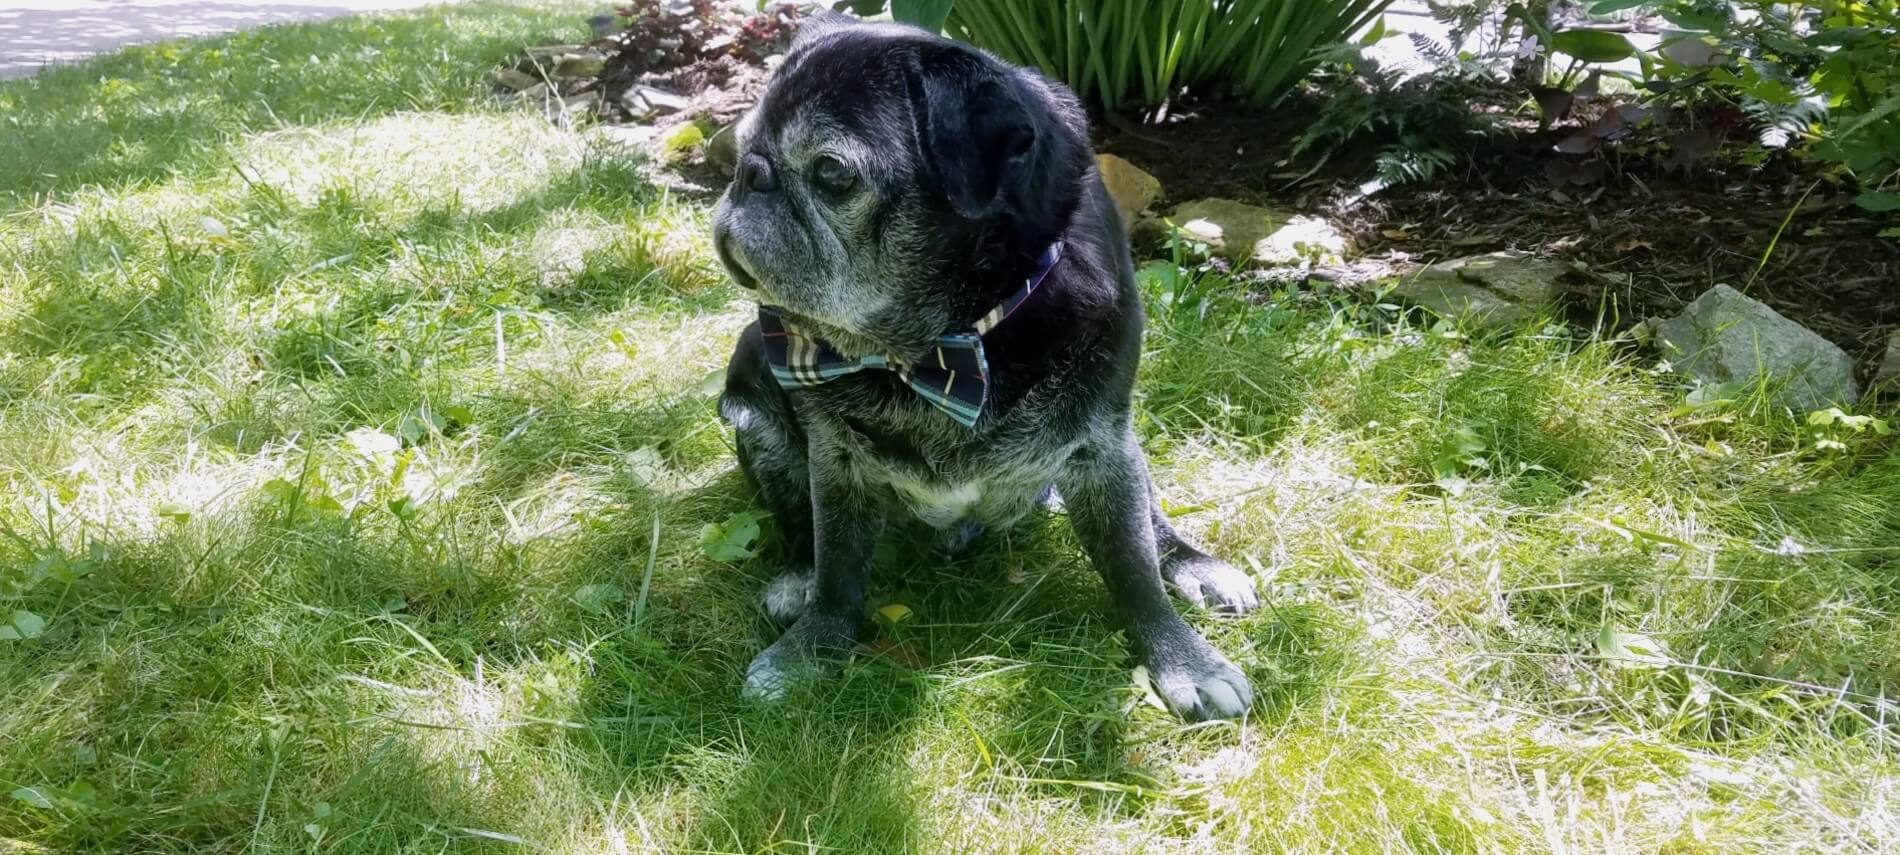 Adorable senior black pug sitting in the grass and wearing a cute bowtie